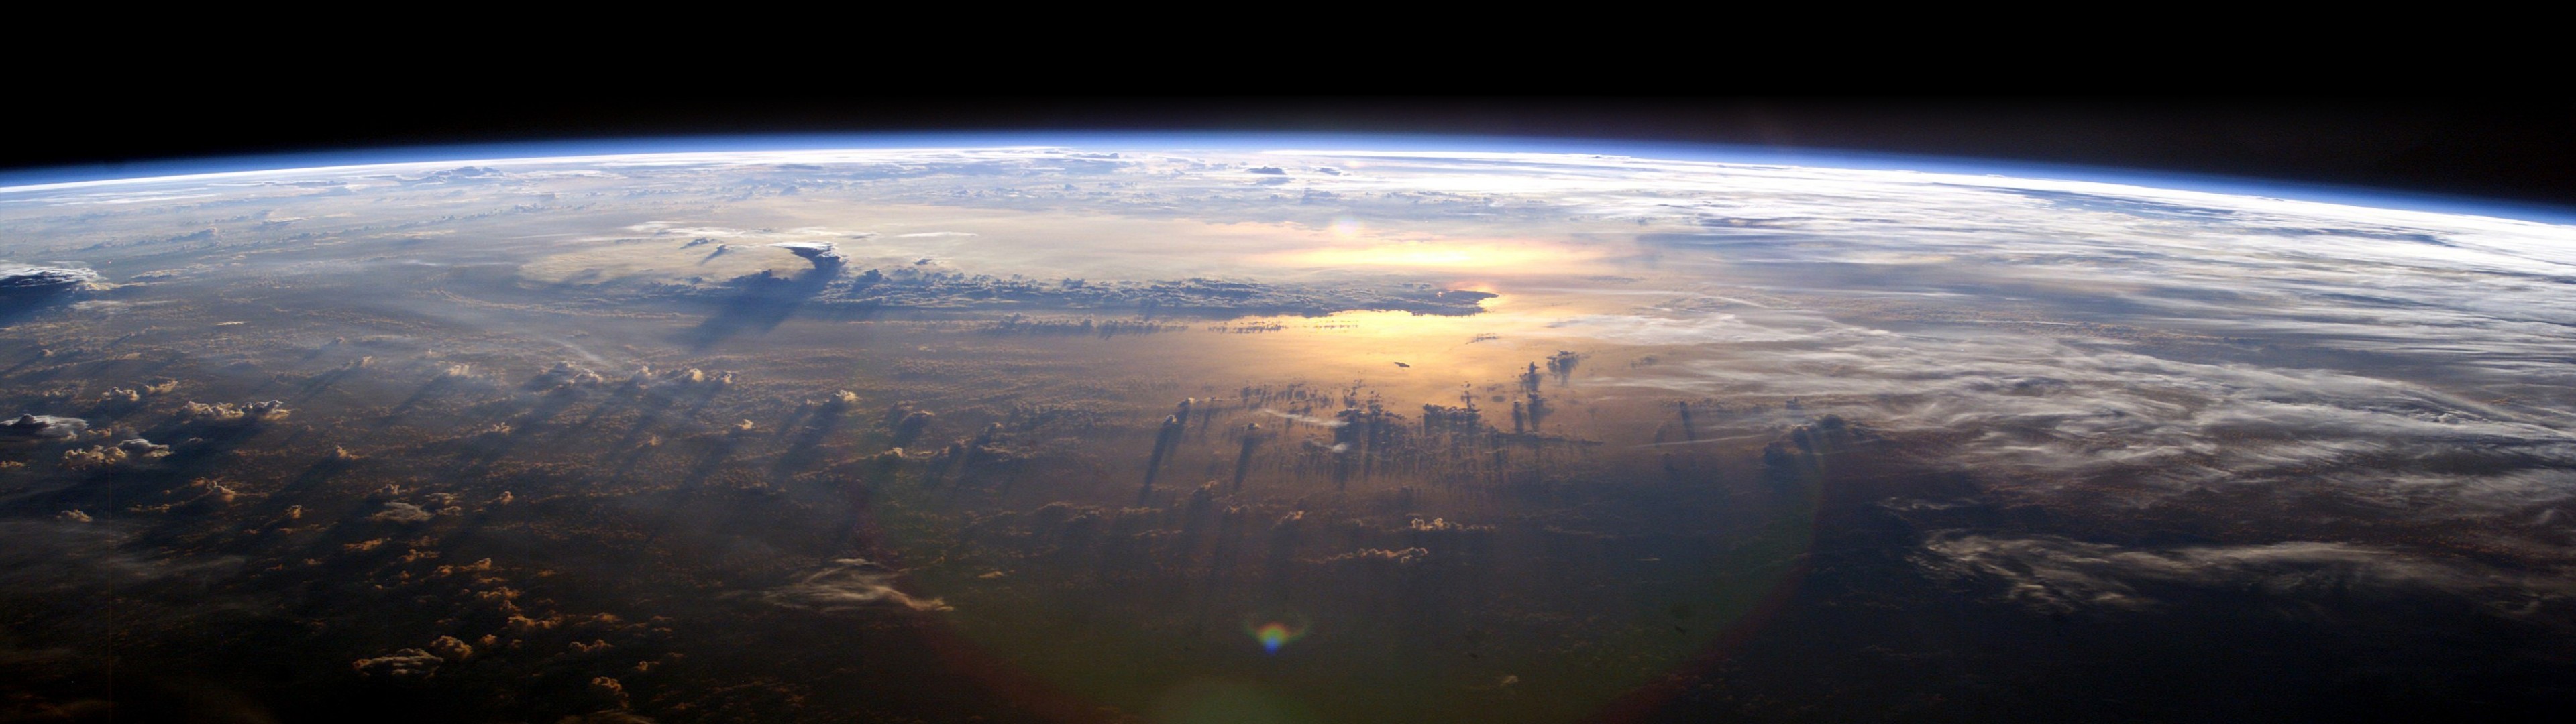 outer-space-earth-atmosphere-orbit-3840×1080-hd-wallpaper-